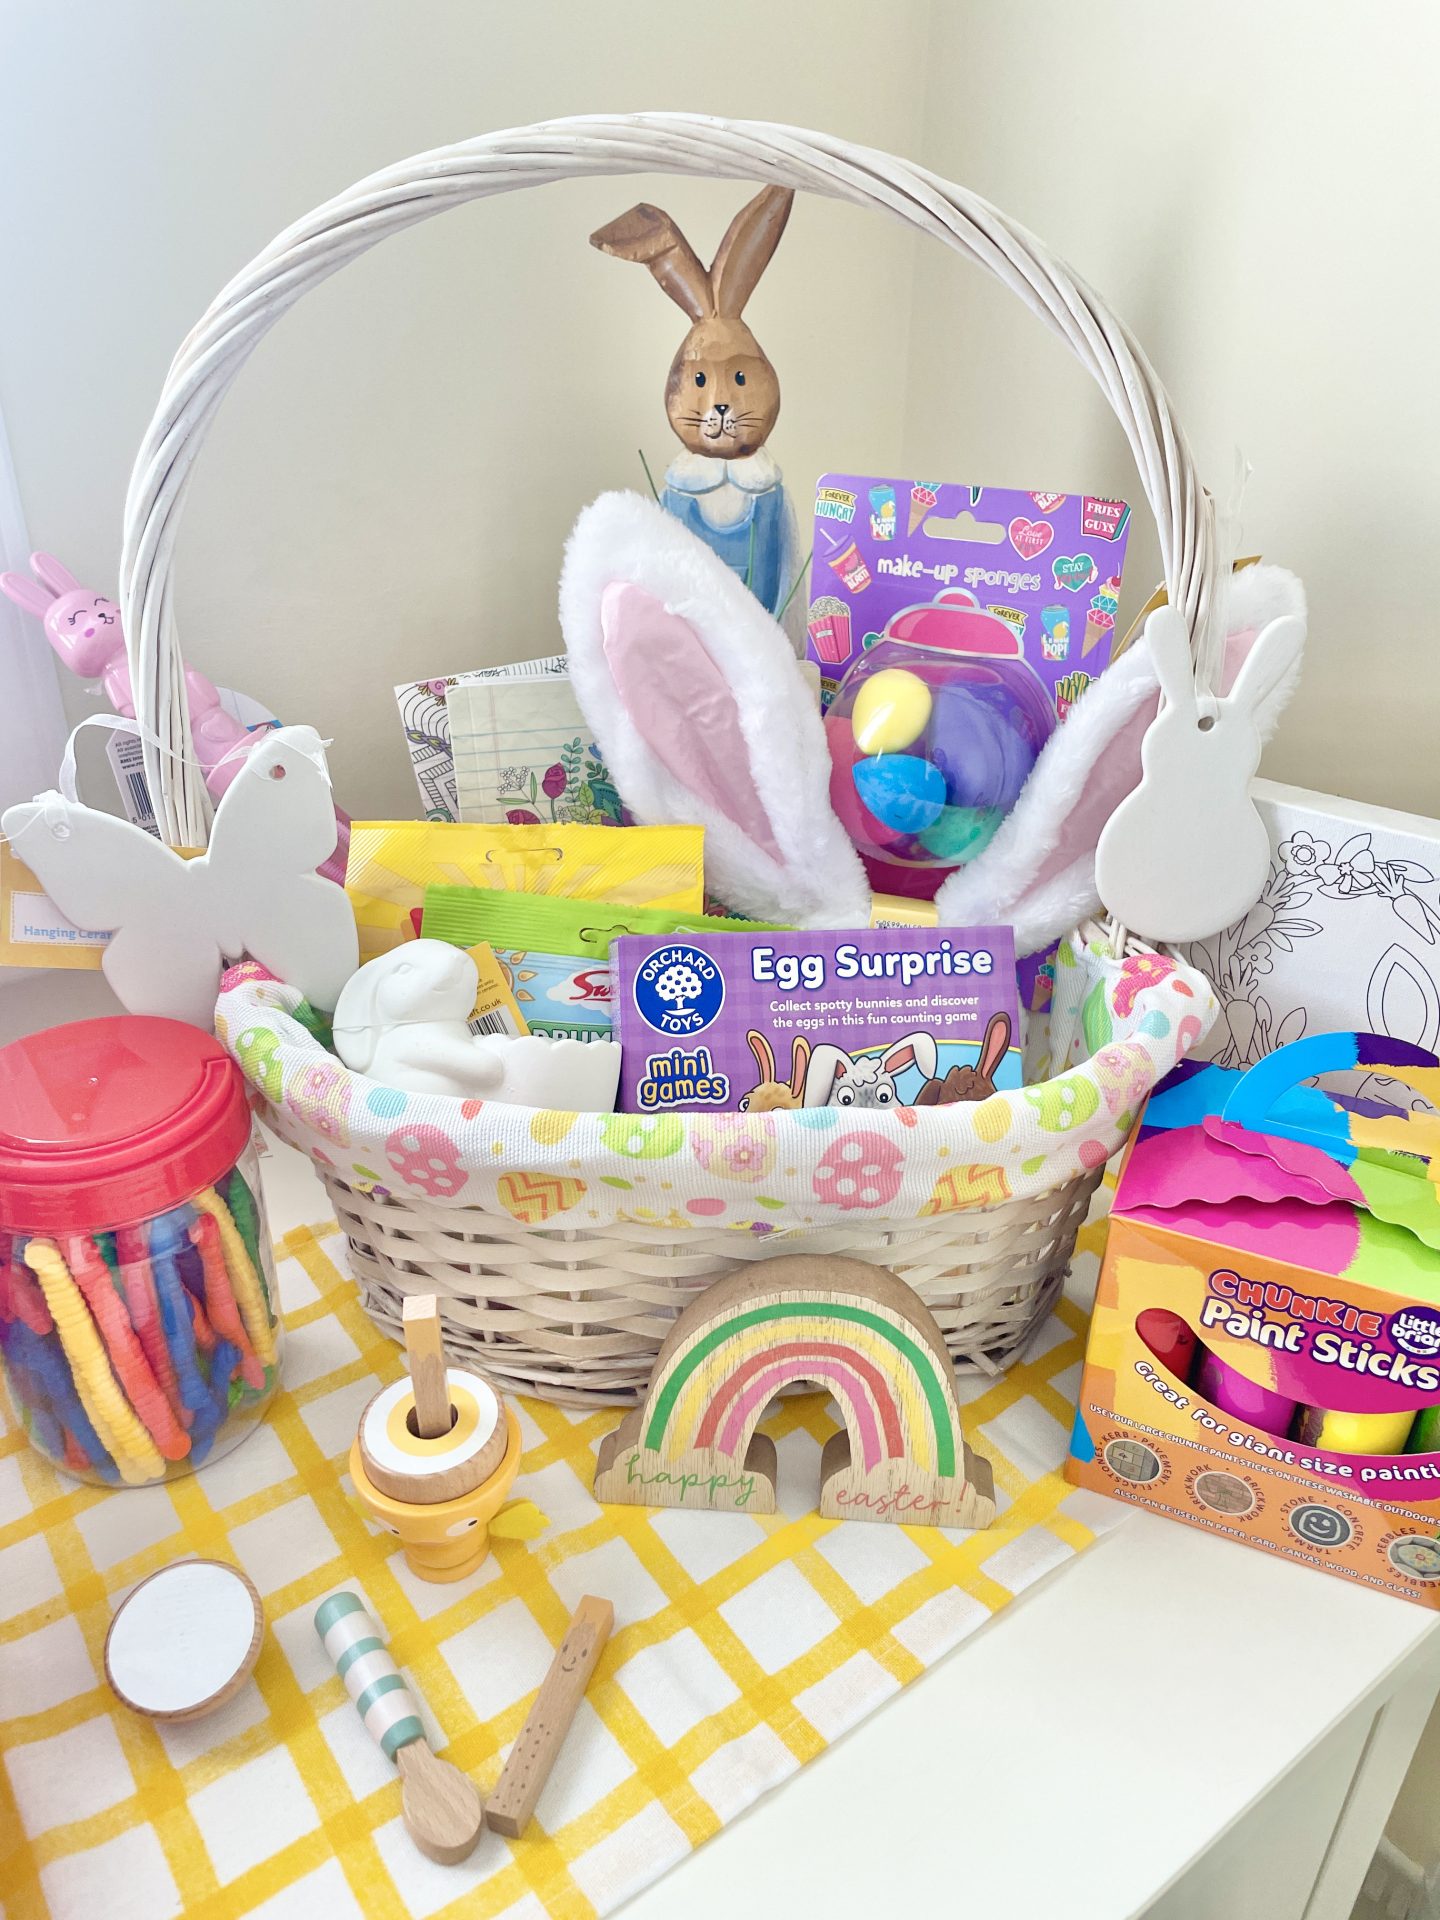 Eggcellent Easter-Themed gifts